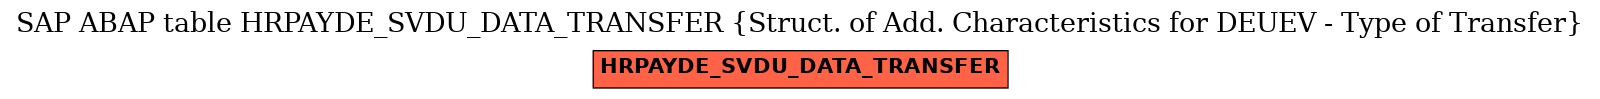 E-R Diagram for table HRPAYDE_SVDU_DATA_TRANSFER (Struct. of Add. Characteristics for DEUEV - Type of Transfer)